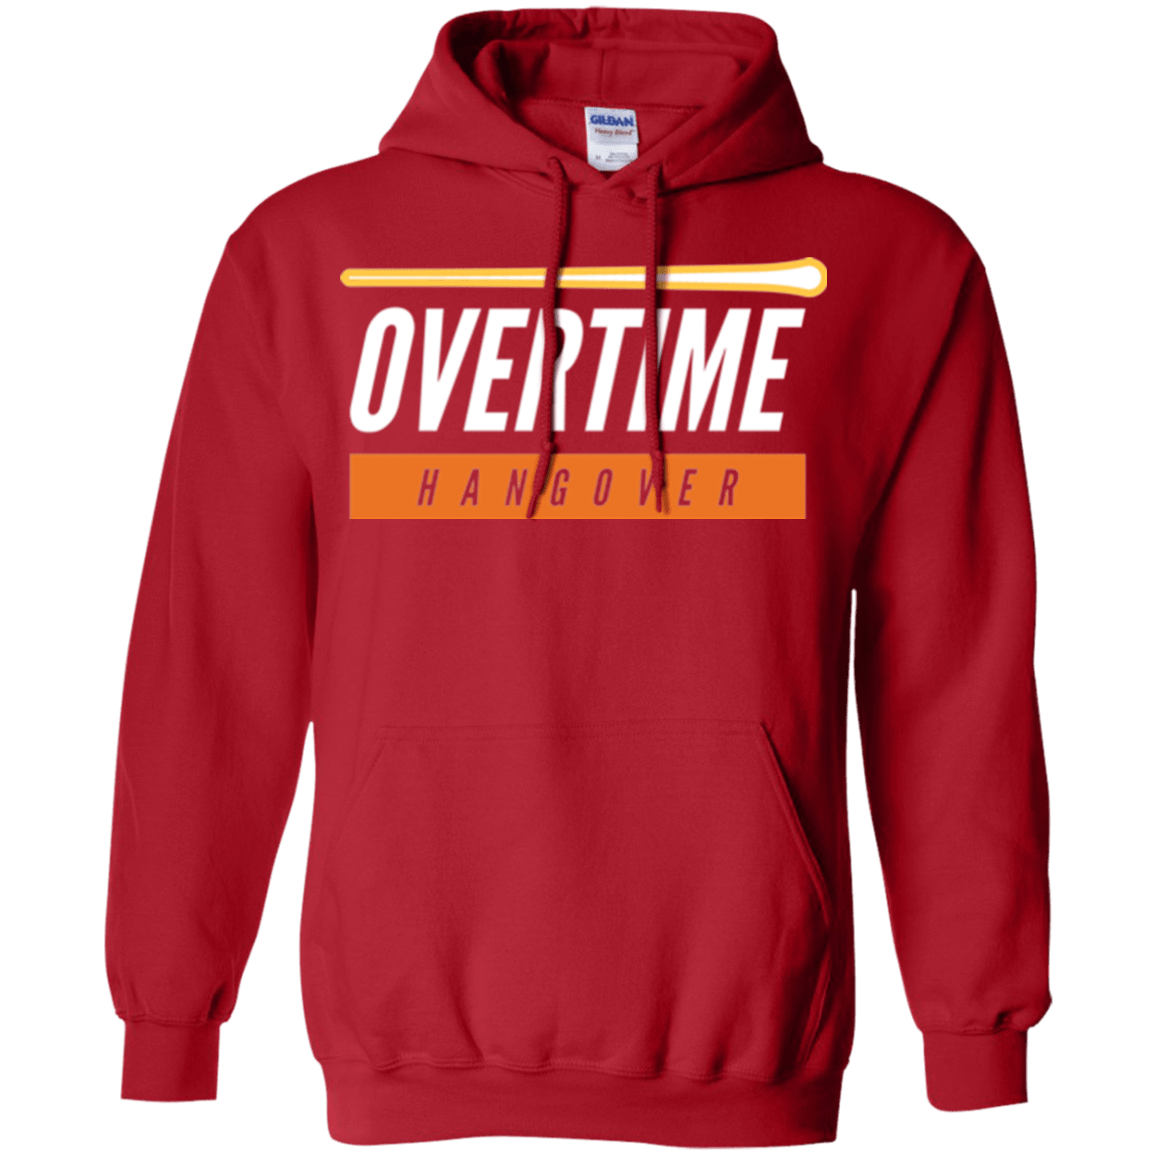 Sweatshirts Red / Small 99 Percent Hangover Pullover Hoodie